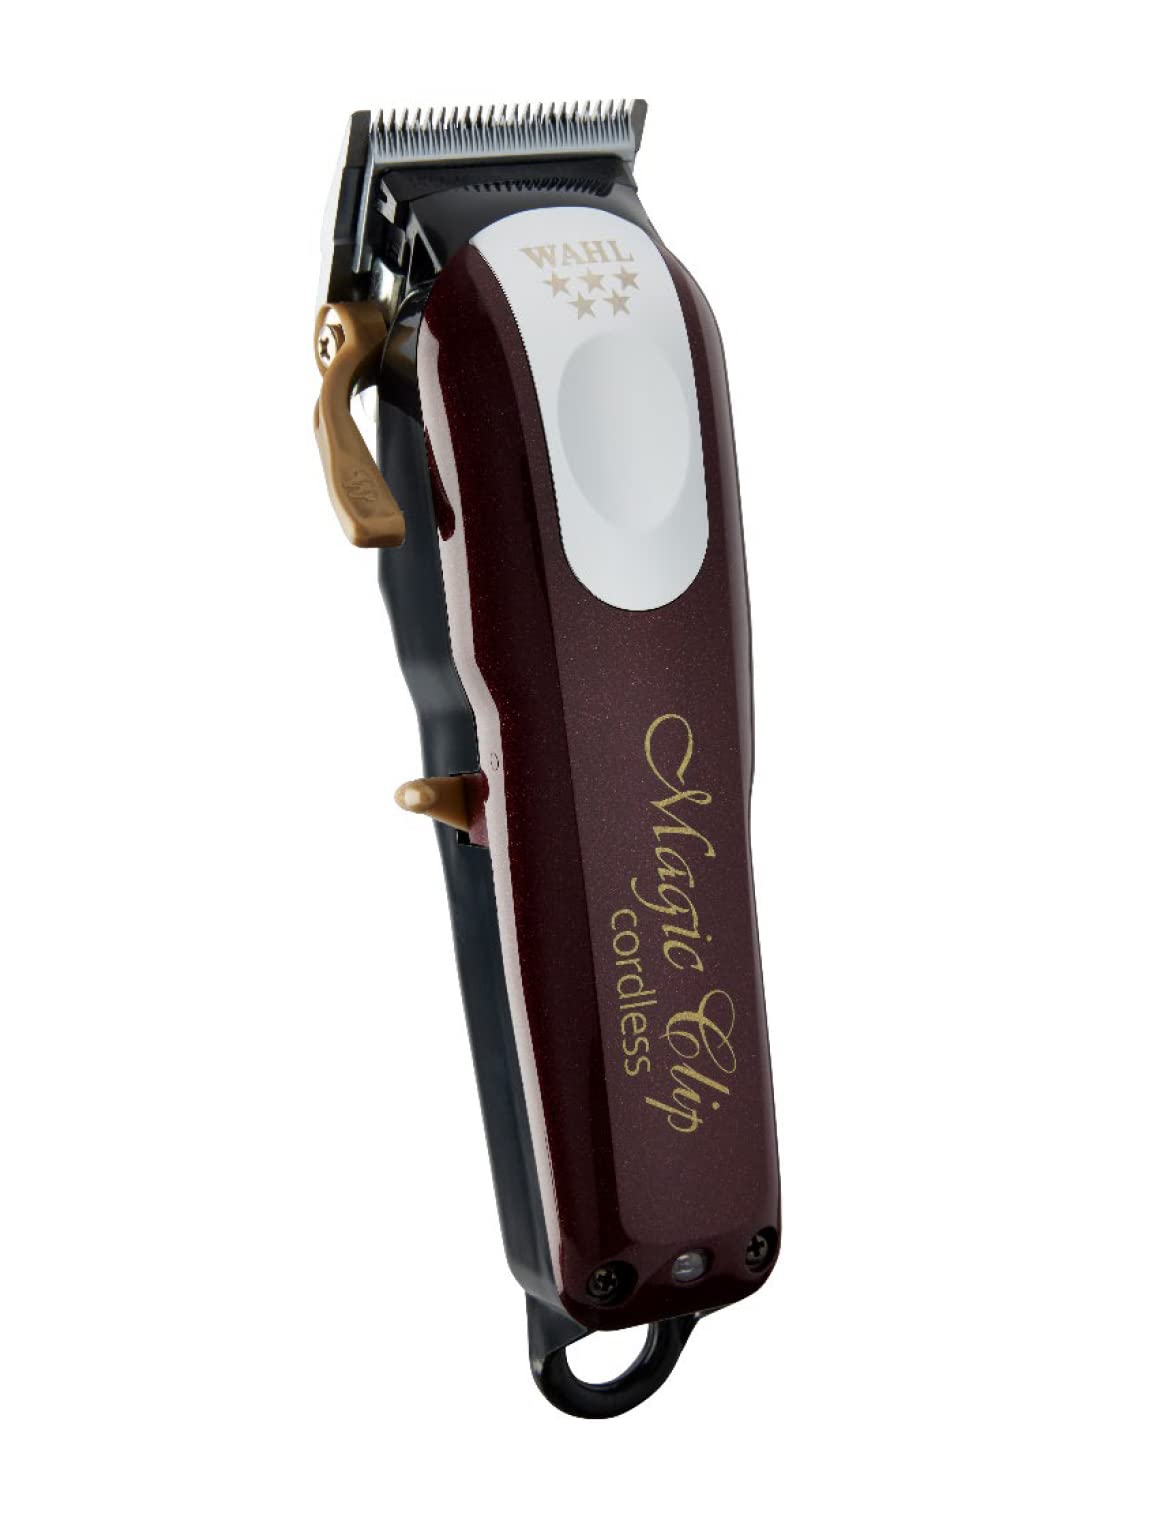 Wahl 5 Star Cordless Magic Clip Hair Clipper with 100+ Minute Run Time for Professional Barbers and Stylists